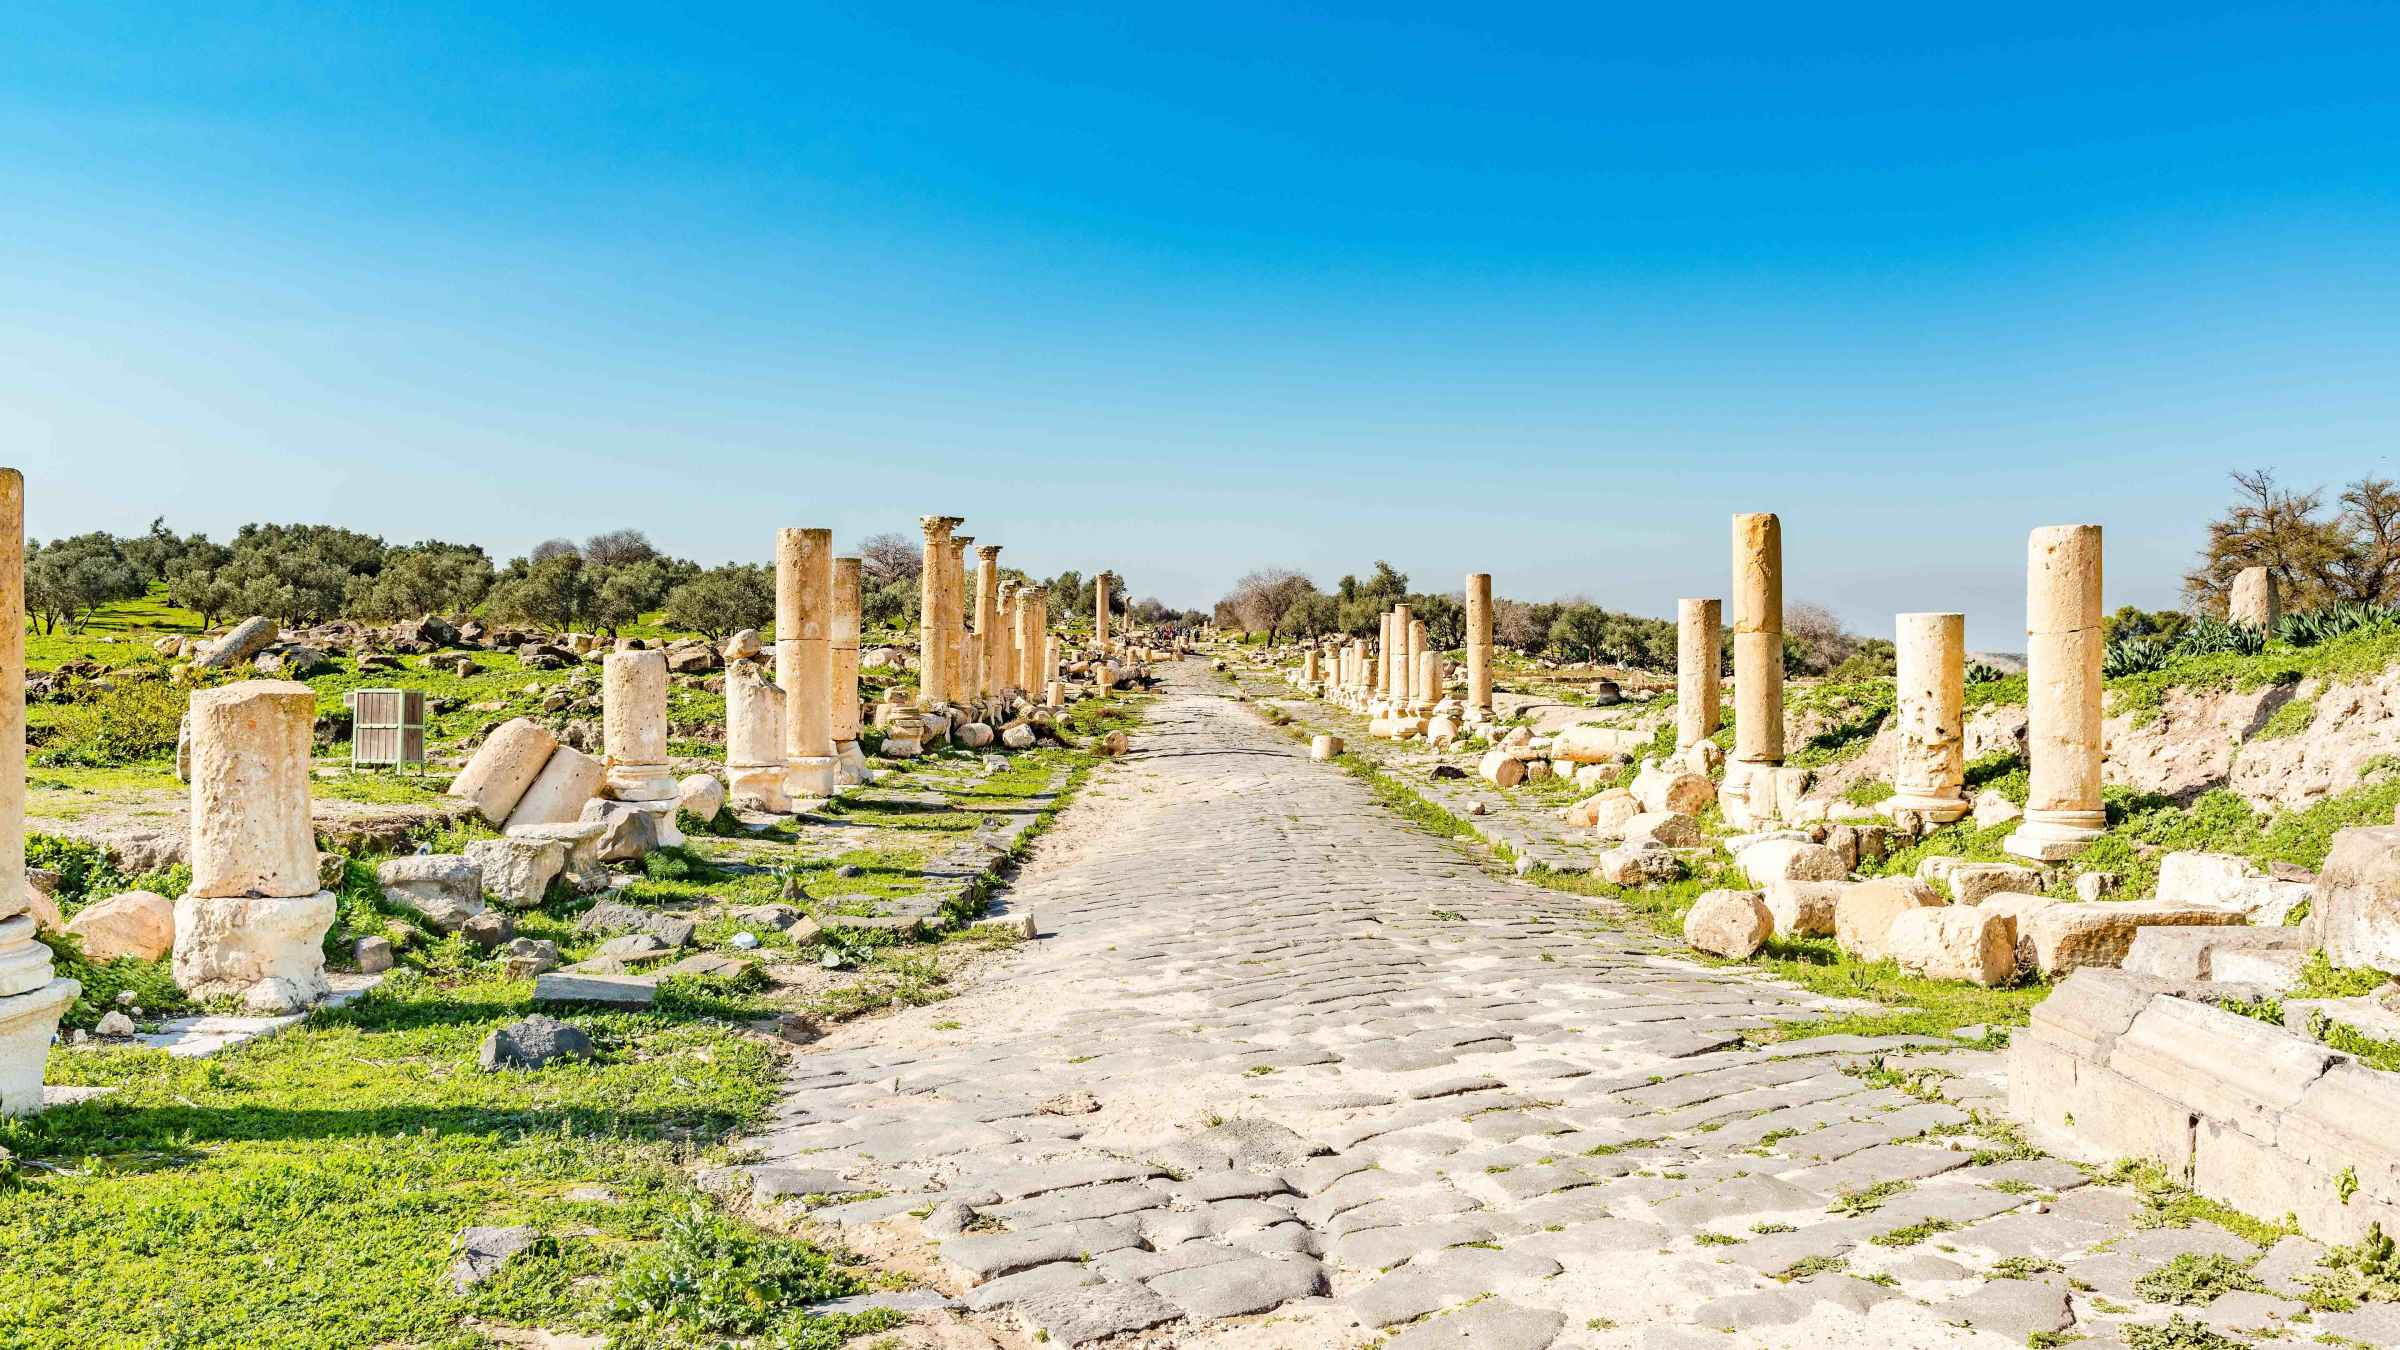 Konsekvent Villig hellig Umm Qais 2022: Top 10 Tours & Activities (with Photos) - Things to Do in Umm  Qais, Jordan | GetYourGuide